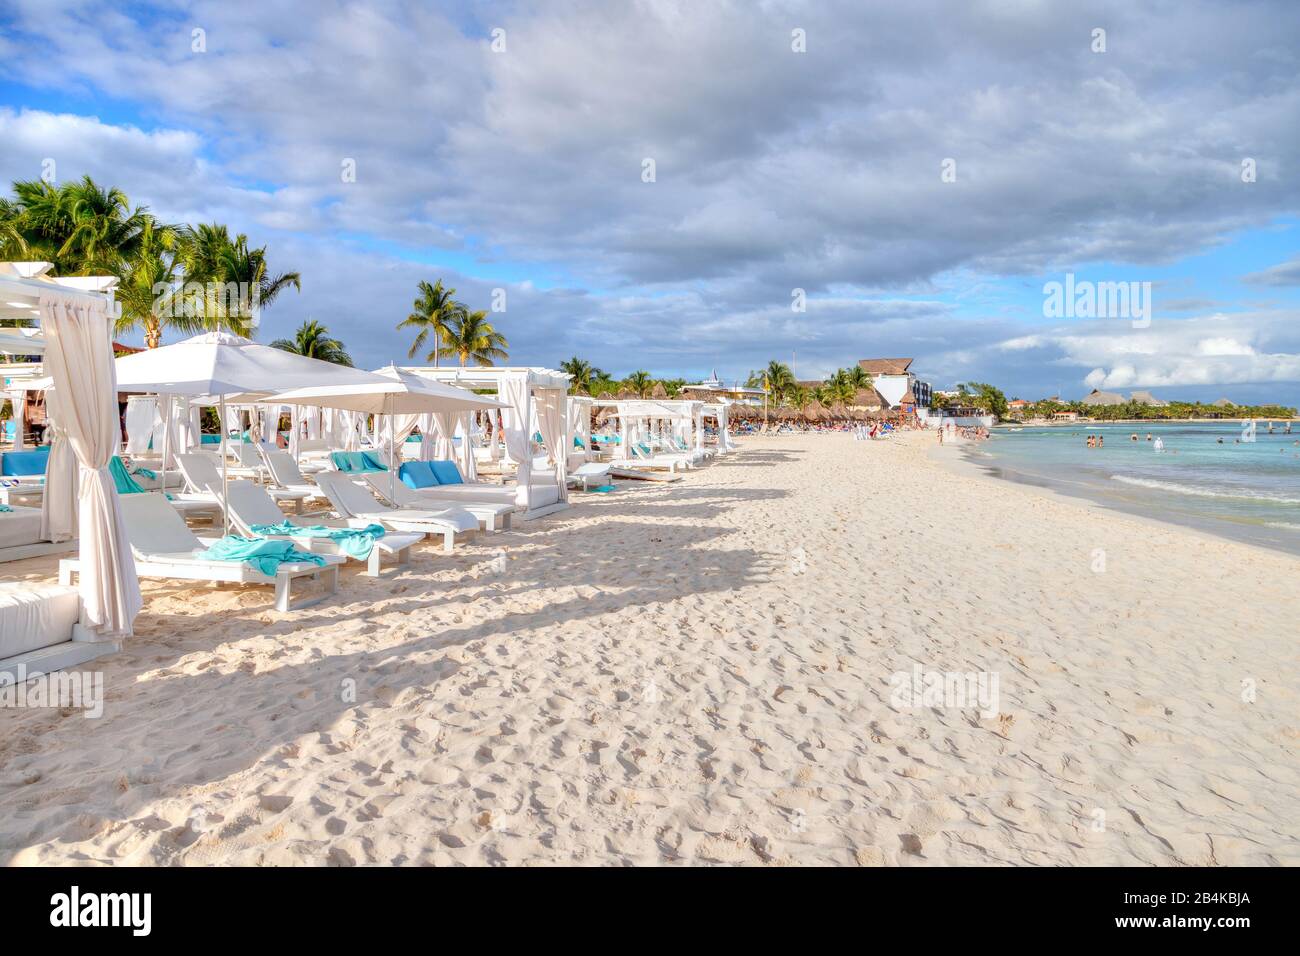 Rows of beds and chairs on a sunny, sandy tropical beach in Caribbean coast of Cancun, Mexico. Concept of Summer vacation or Winter getaway fun. Stock Photo